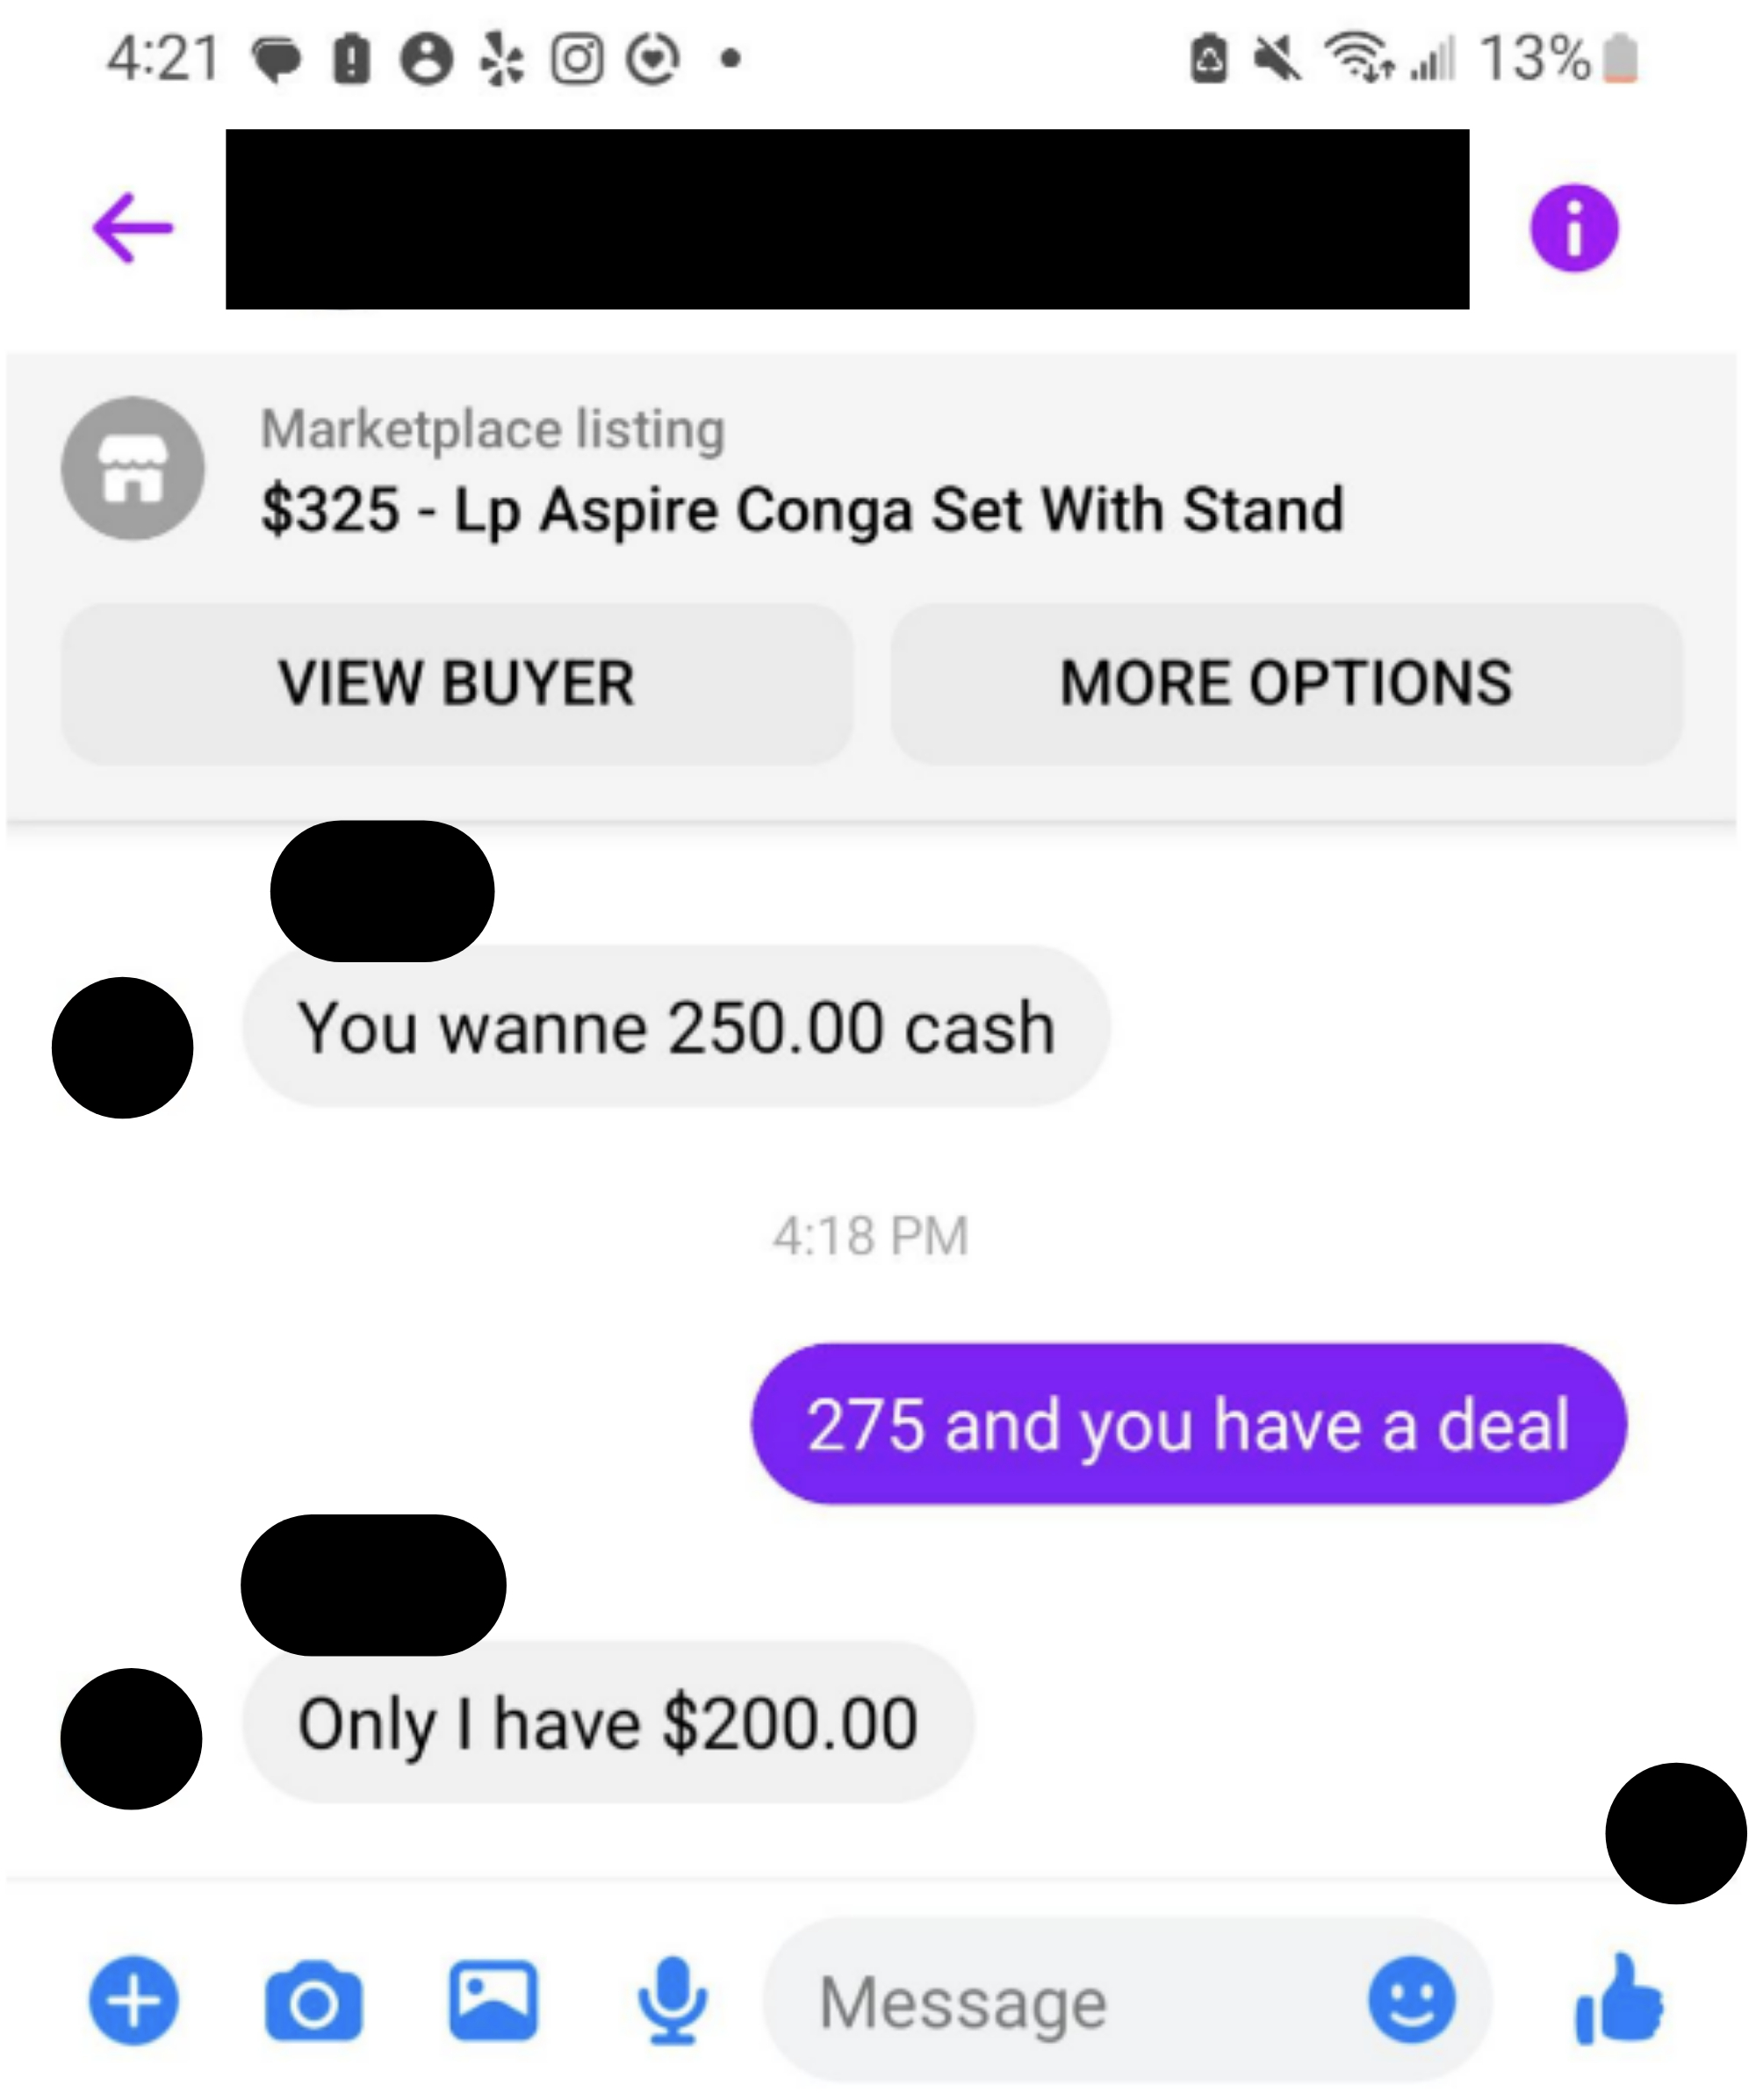 &quot;Only I have $200.00&quot;